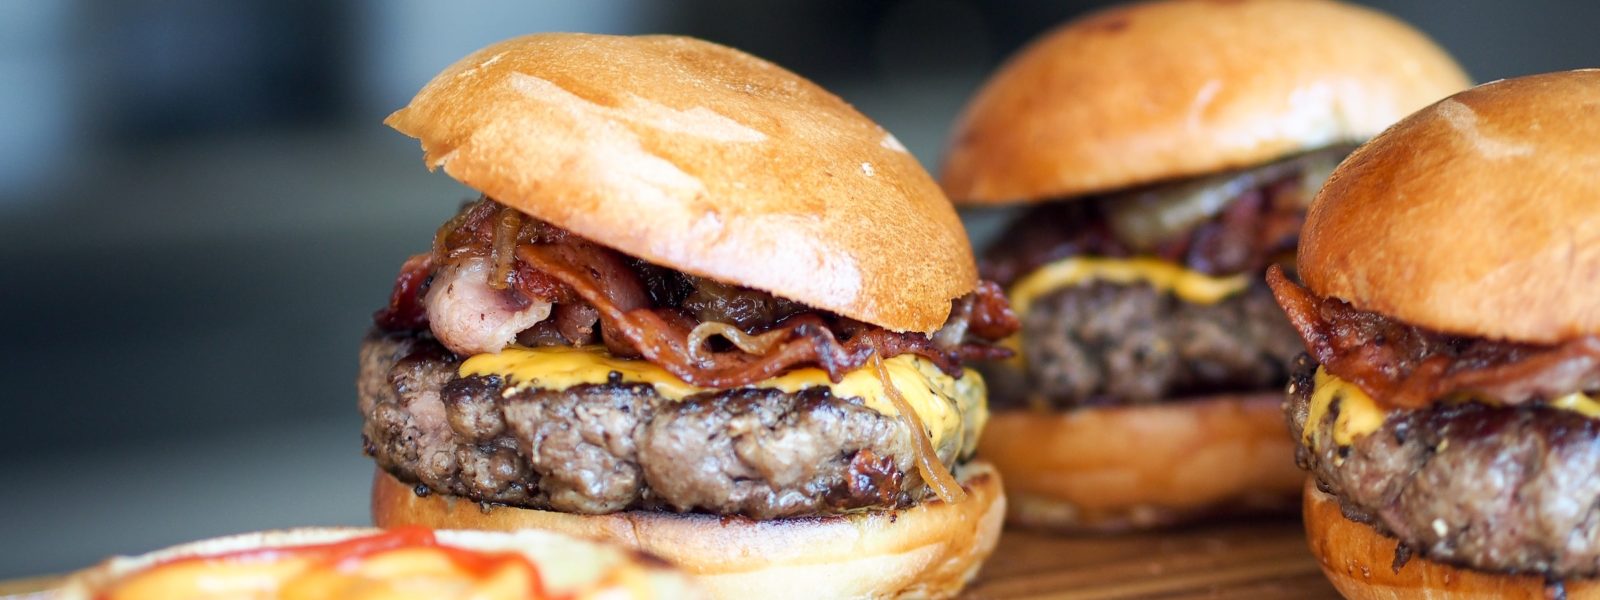 Three bacon cheeseburgers on a wooden board